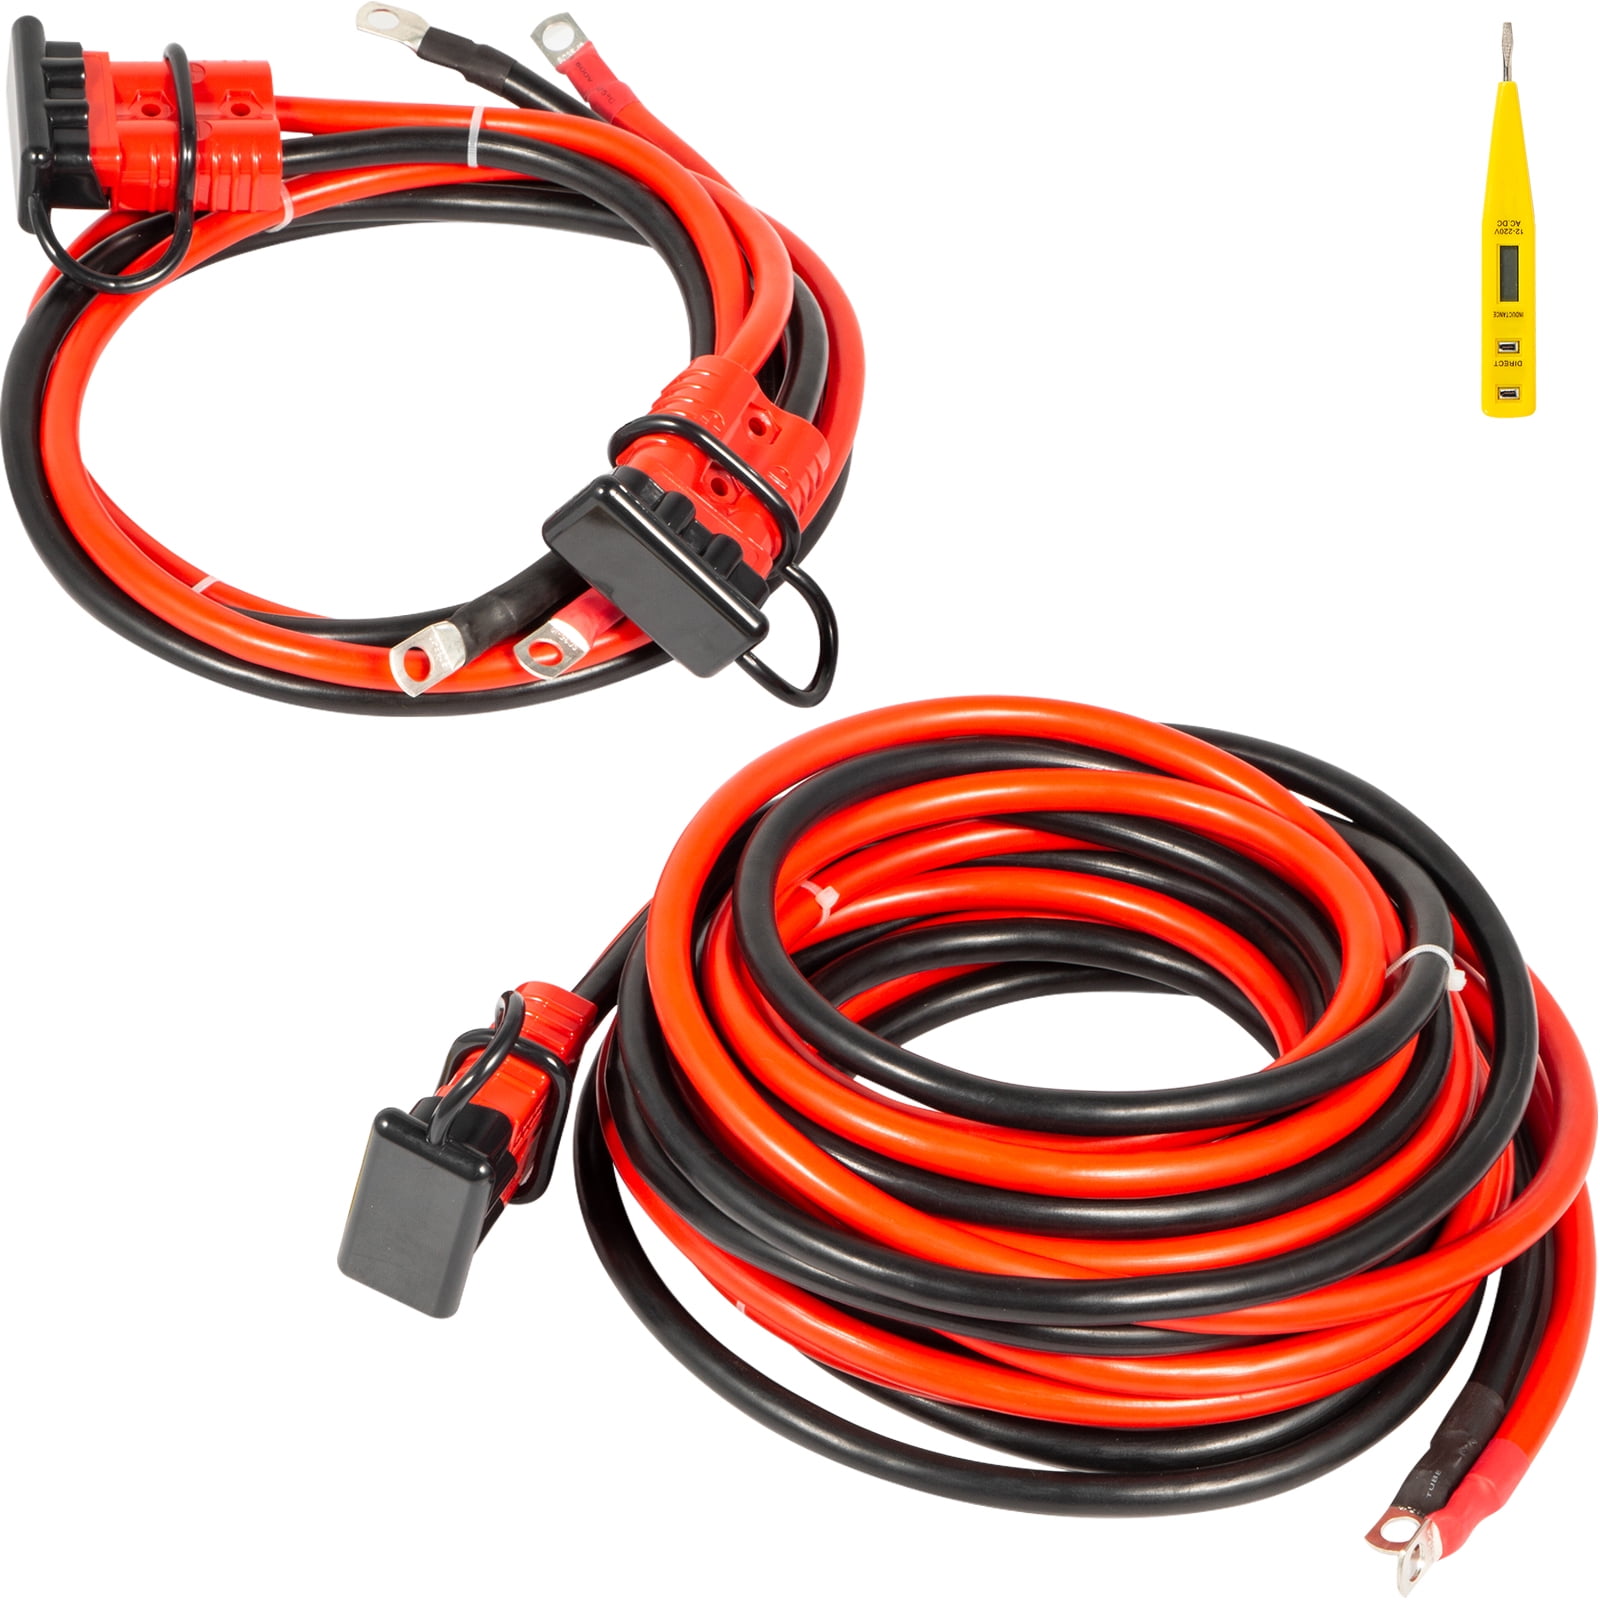 Spartan Power 2 AWG 6 Foot Battery Cable with Anderson Connector and 3/8 